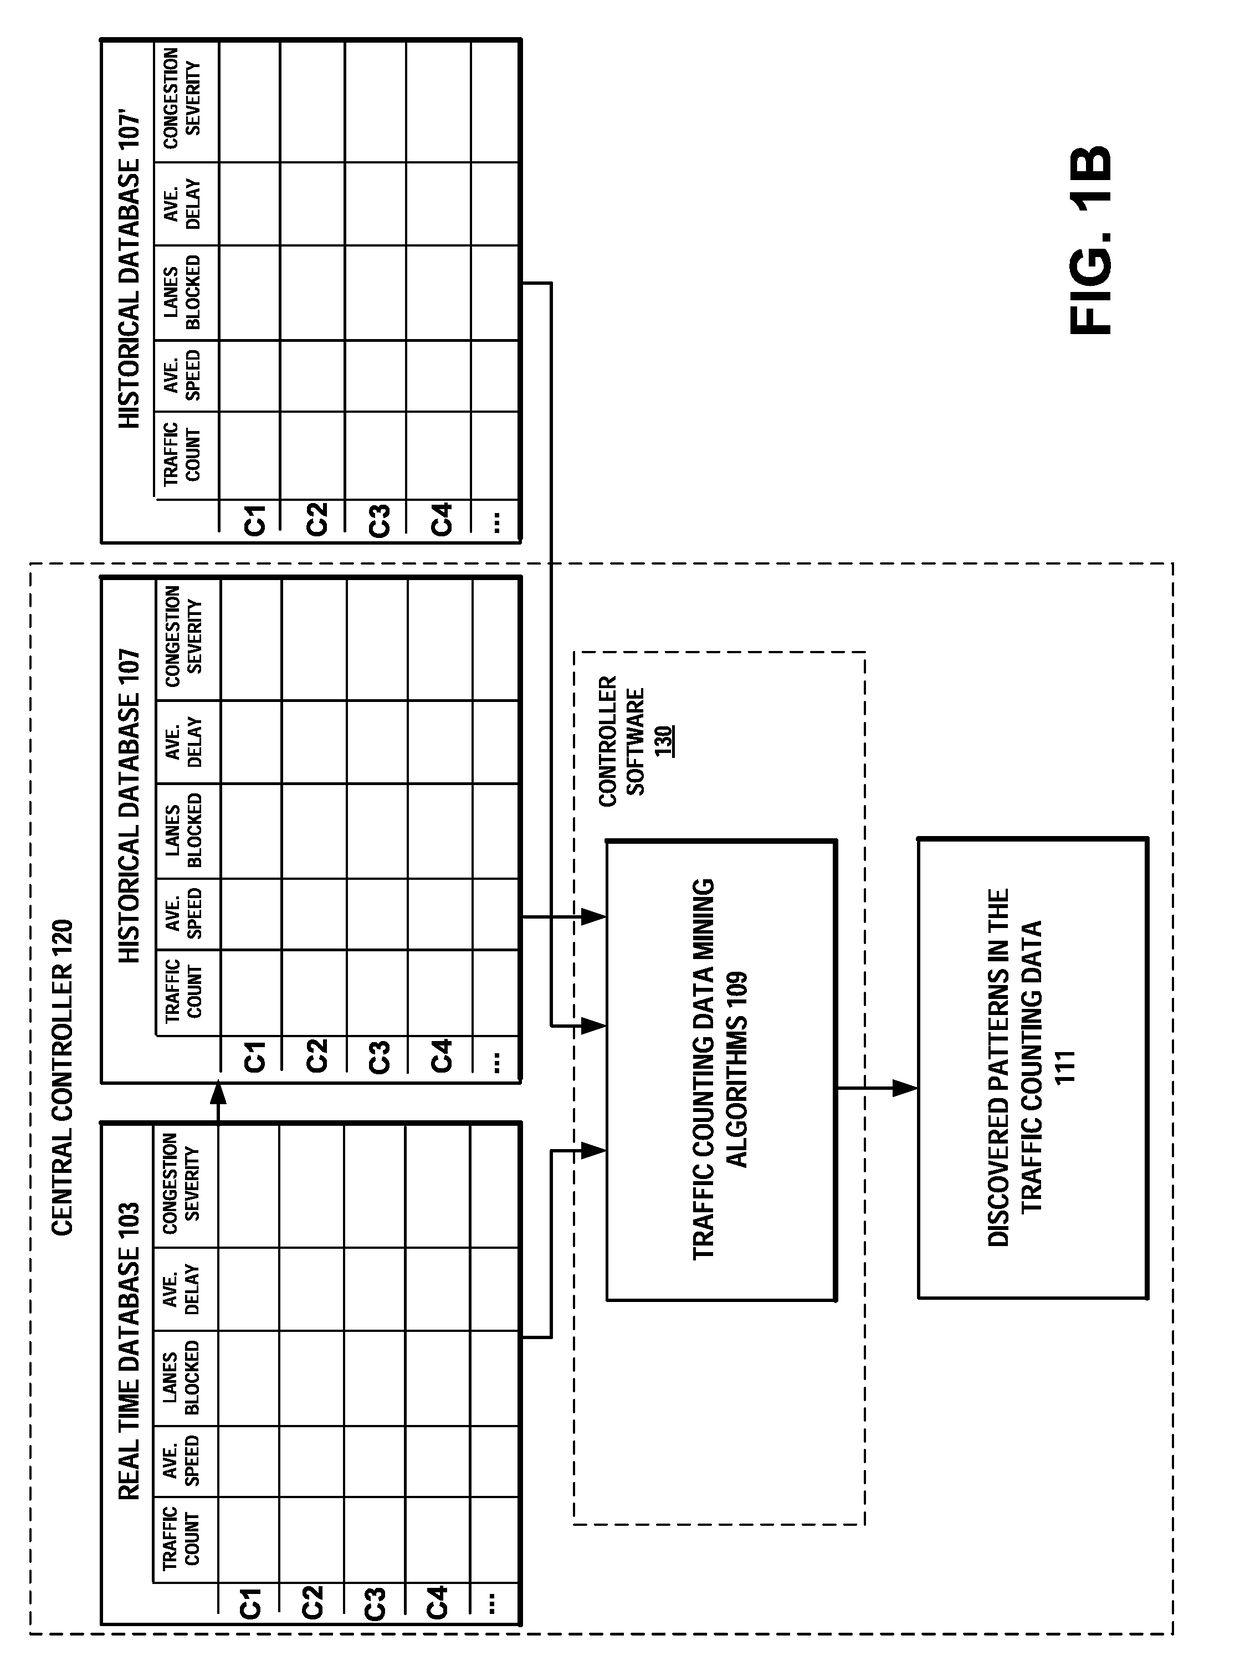 Distributed system for mining, correlating, and analyzing locally obtained traffic data including video